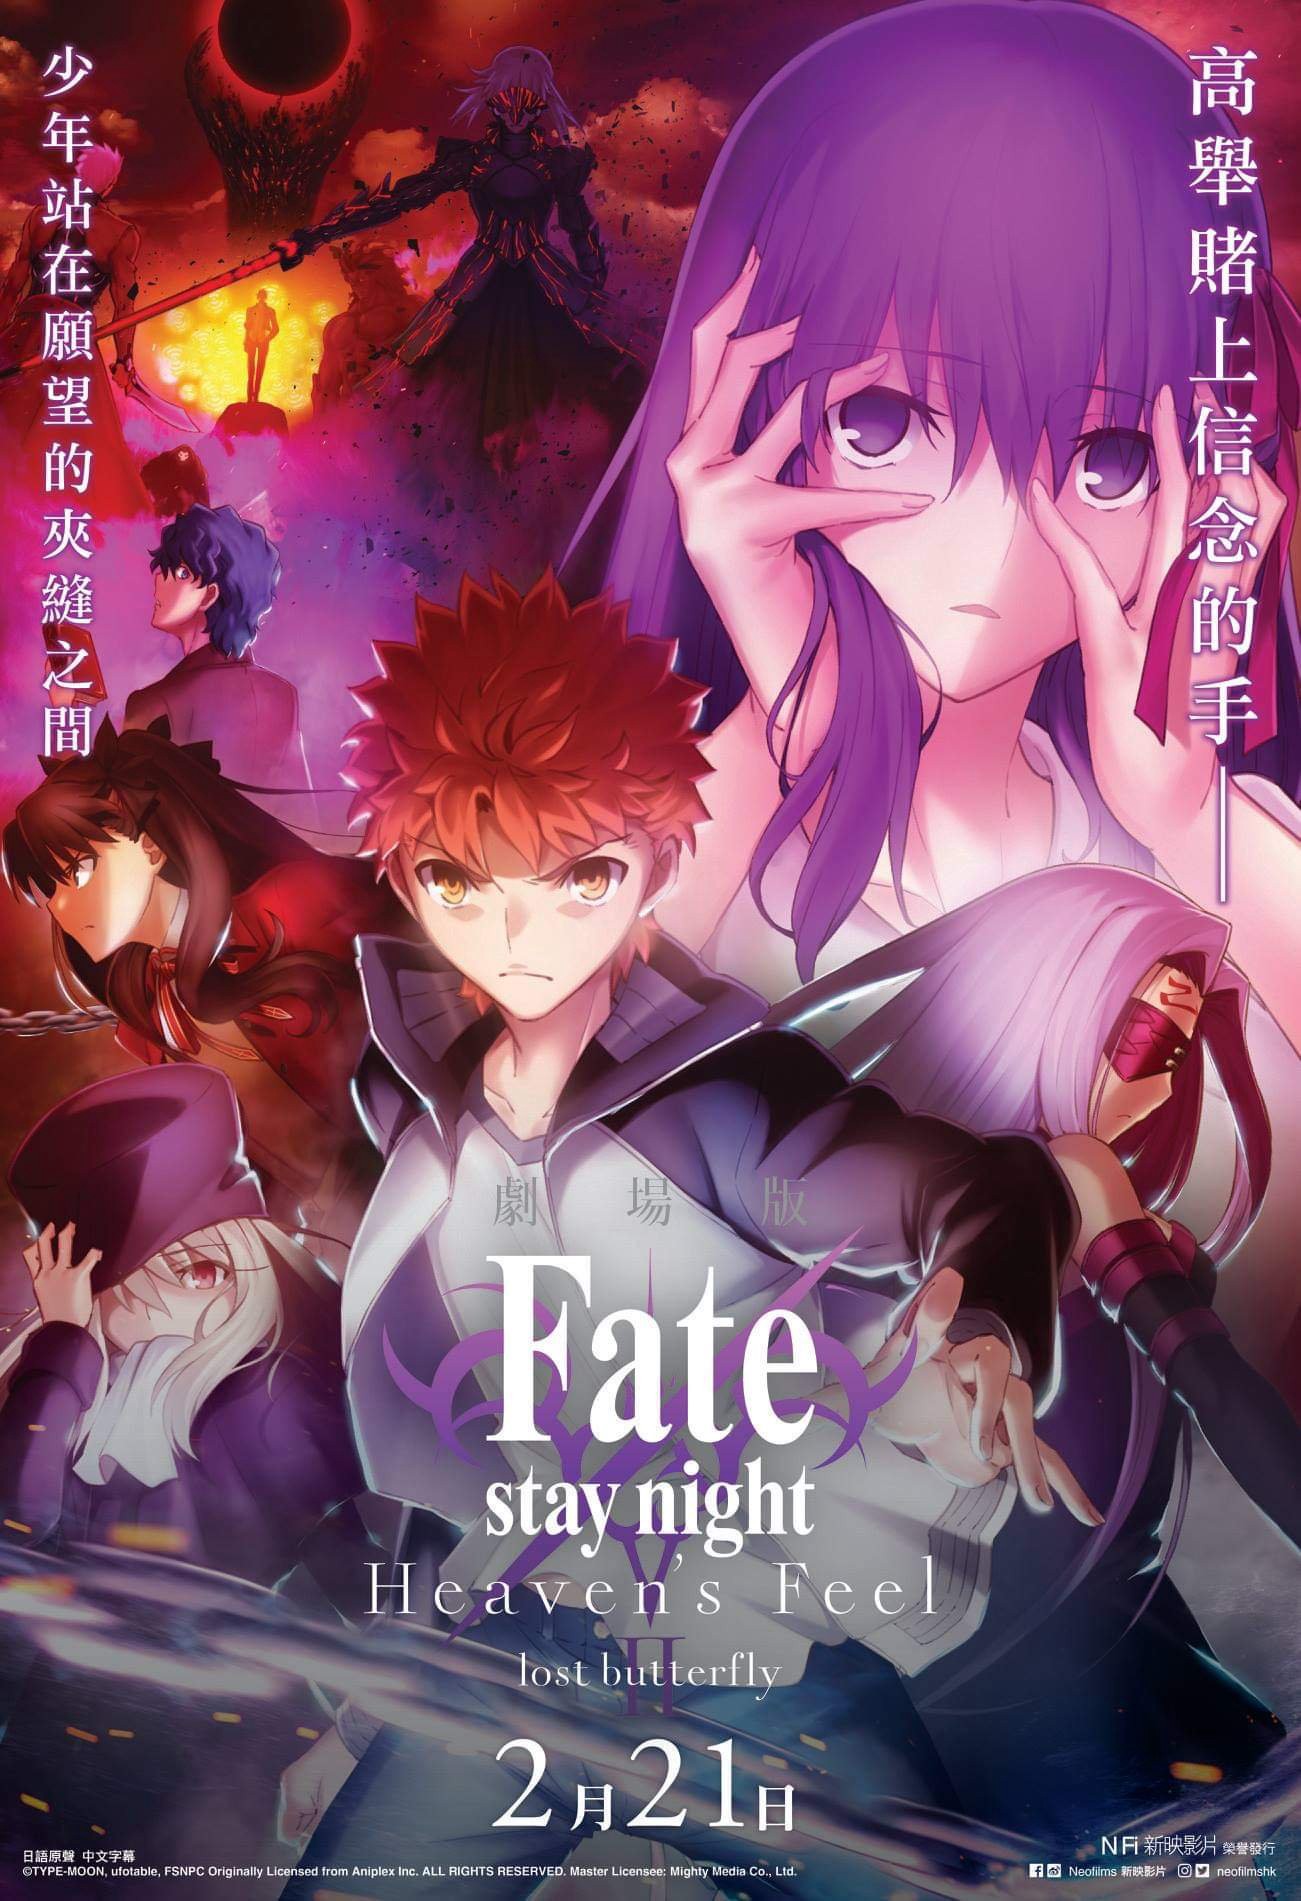 Pennsylvasia Japanese Movies Fate Stay Night Heaven S Feel 1 2 劇場版 Fate Stay Night Heaven S Feel Playing In Pittsburgh In Double Feature November 14